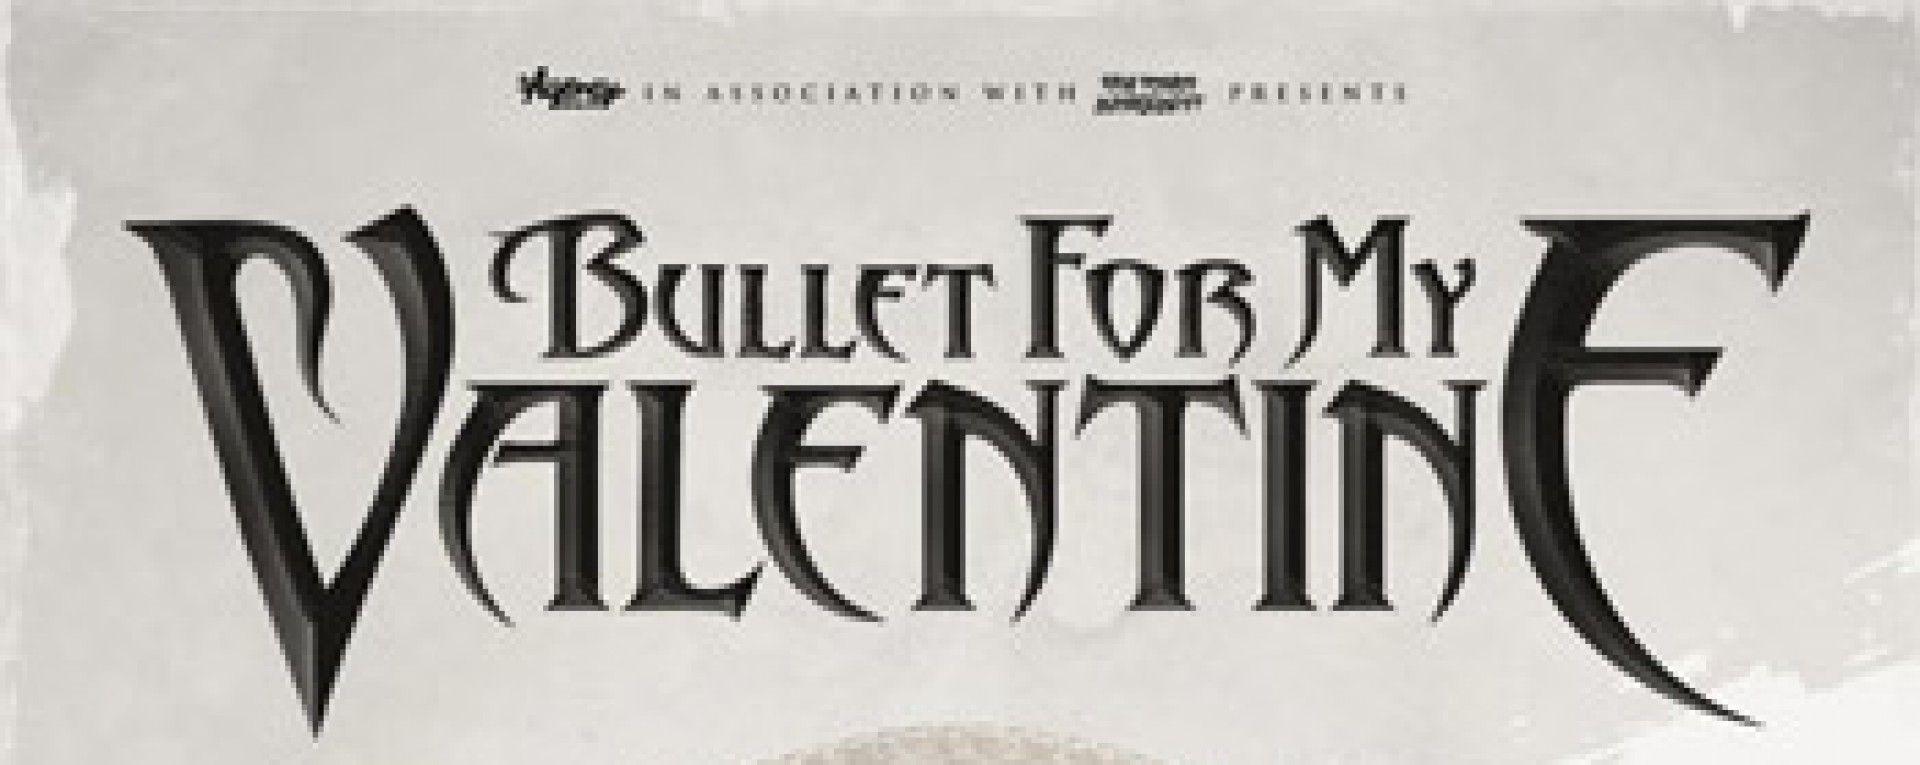 Bullet for My Valentine Logo - Bullet For My Valentine Announce 2015 UK Tour - SuprTickets